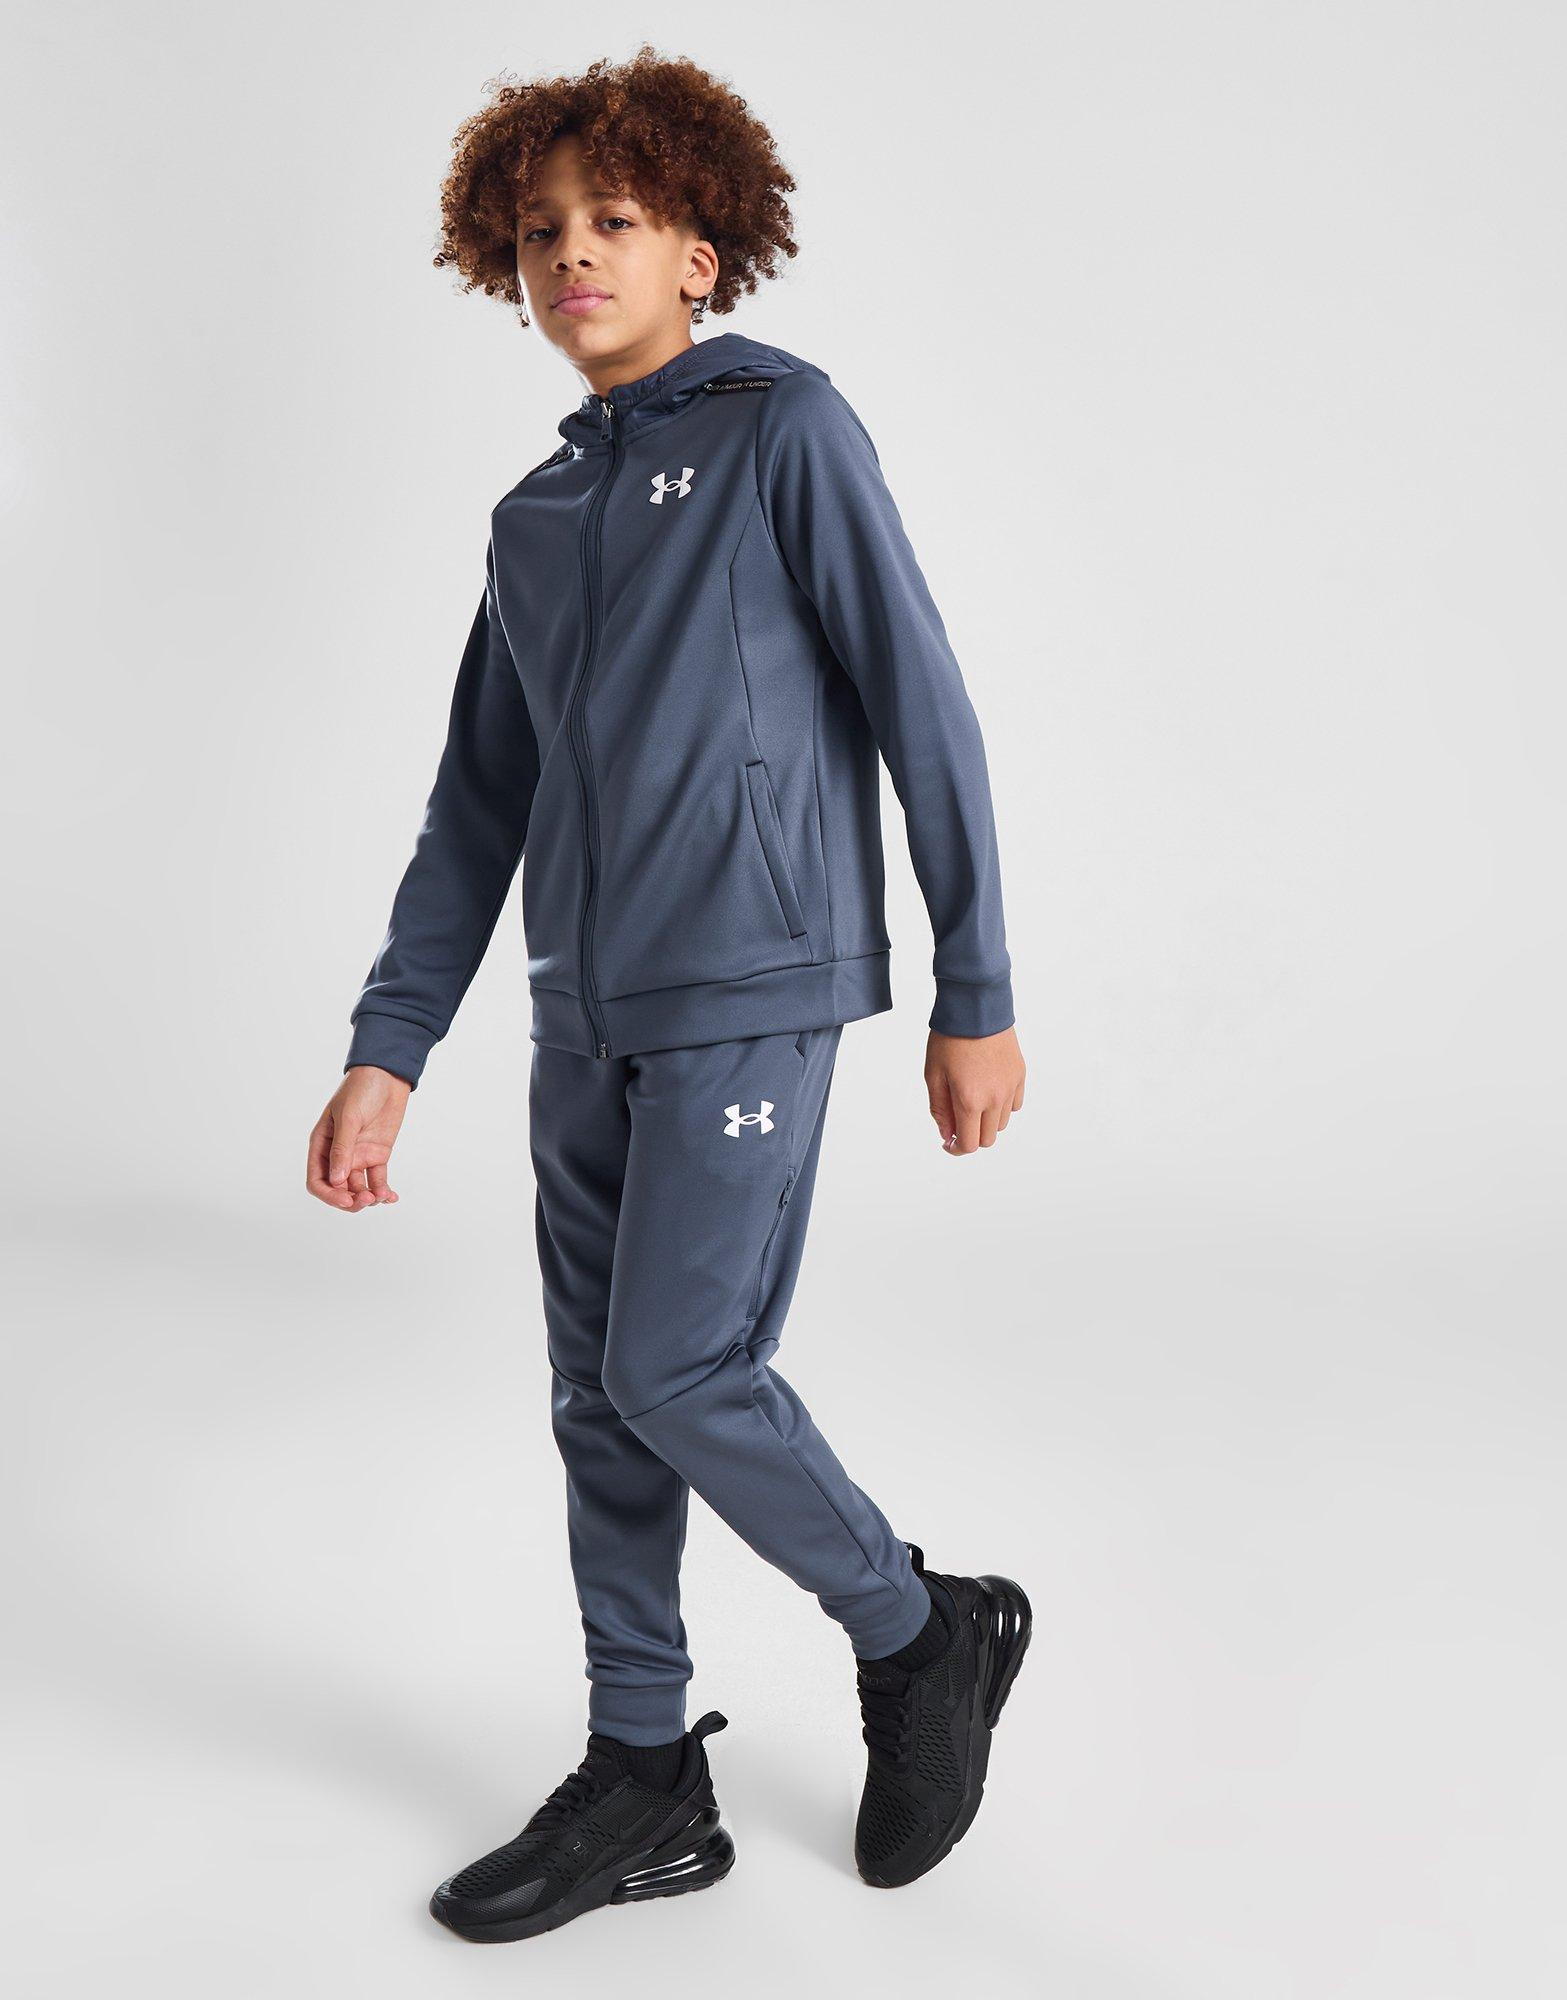 Under Armour tracksuit in navy